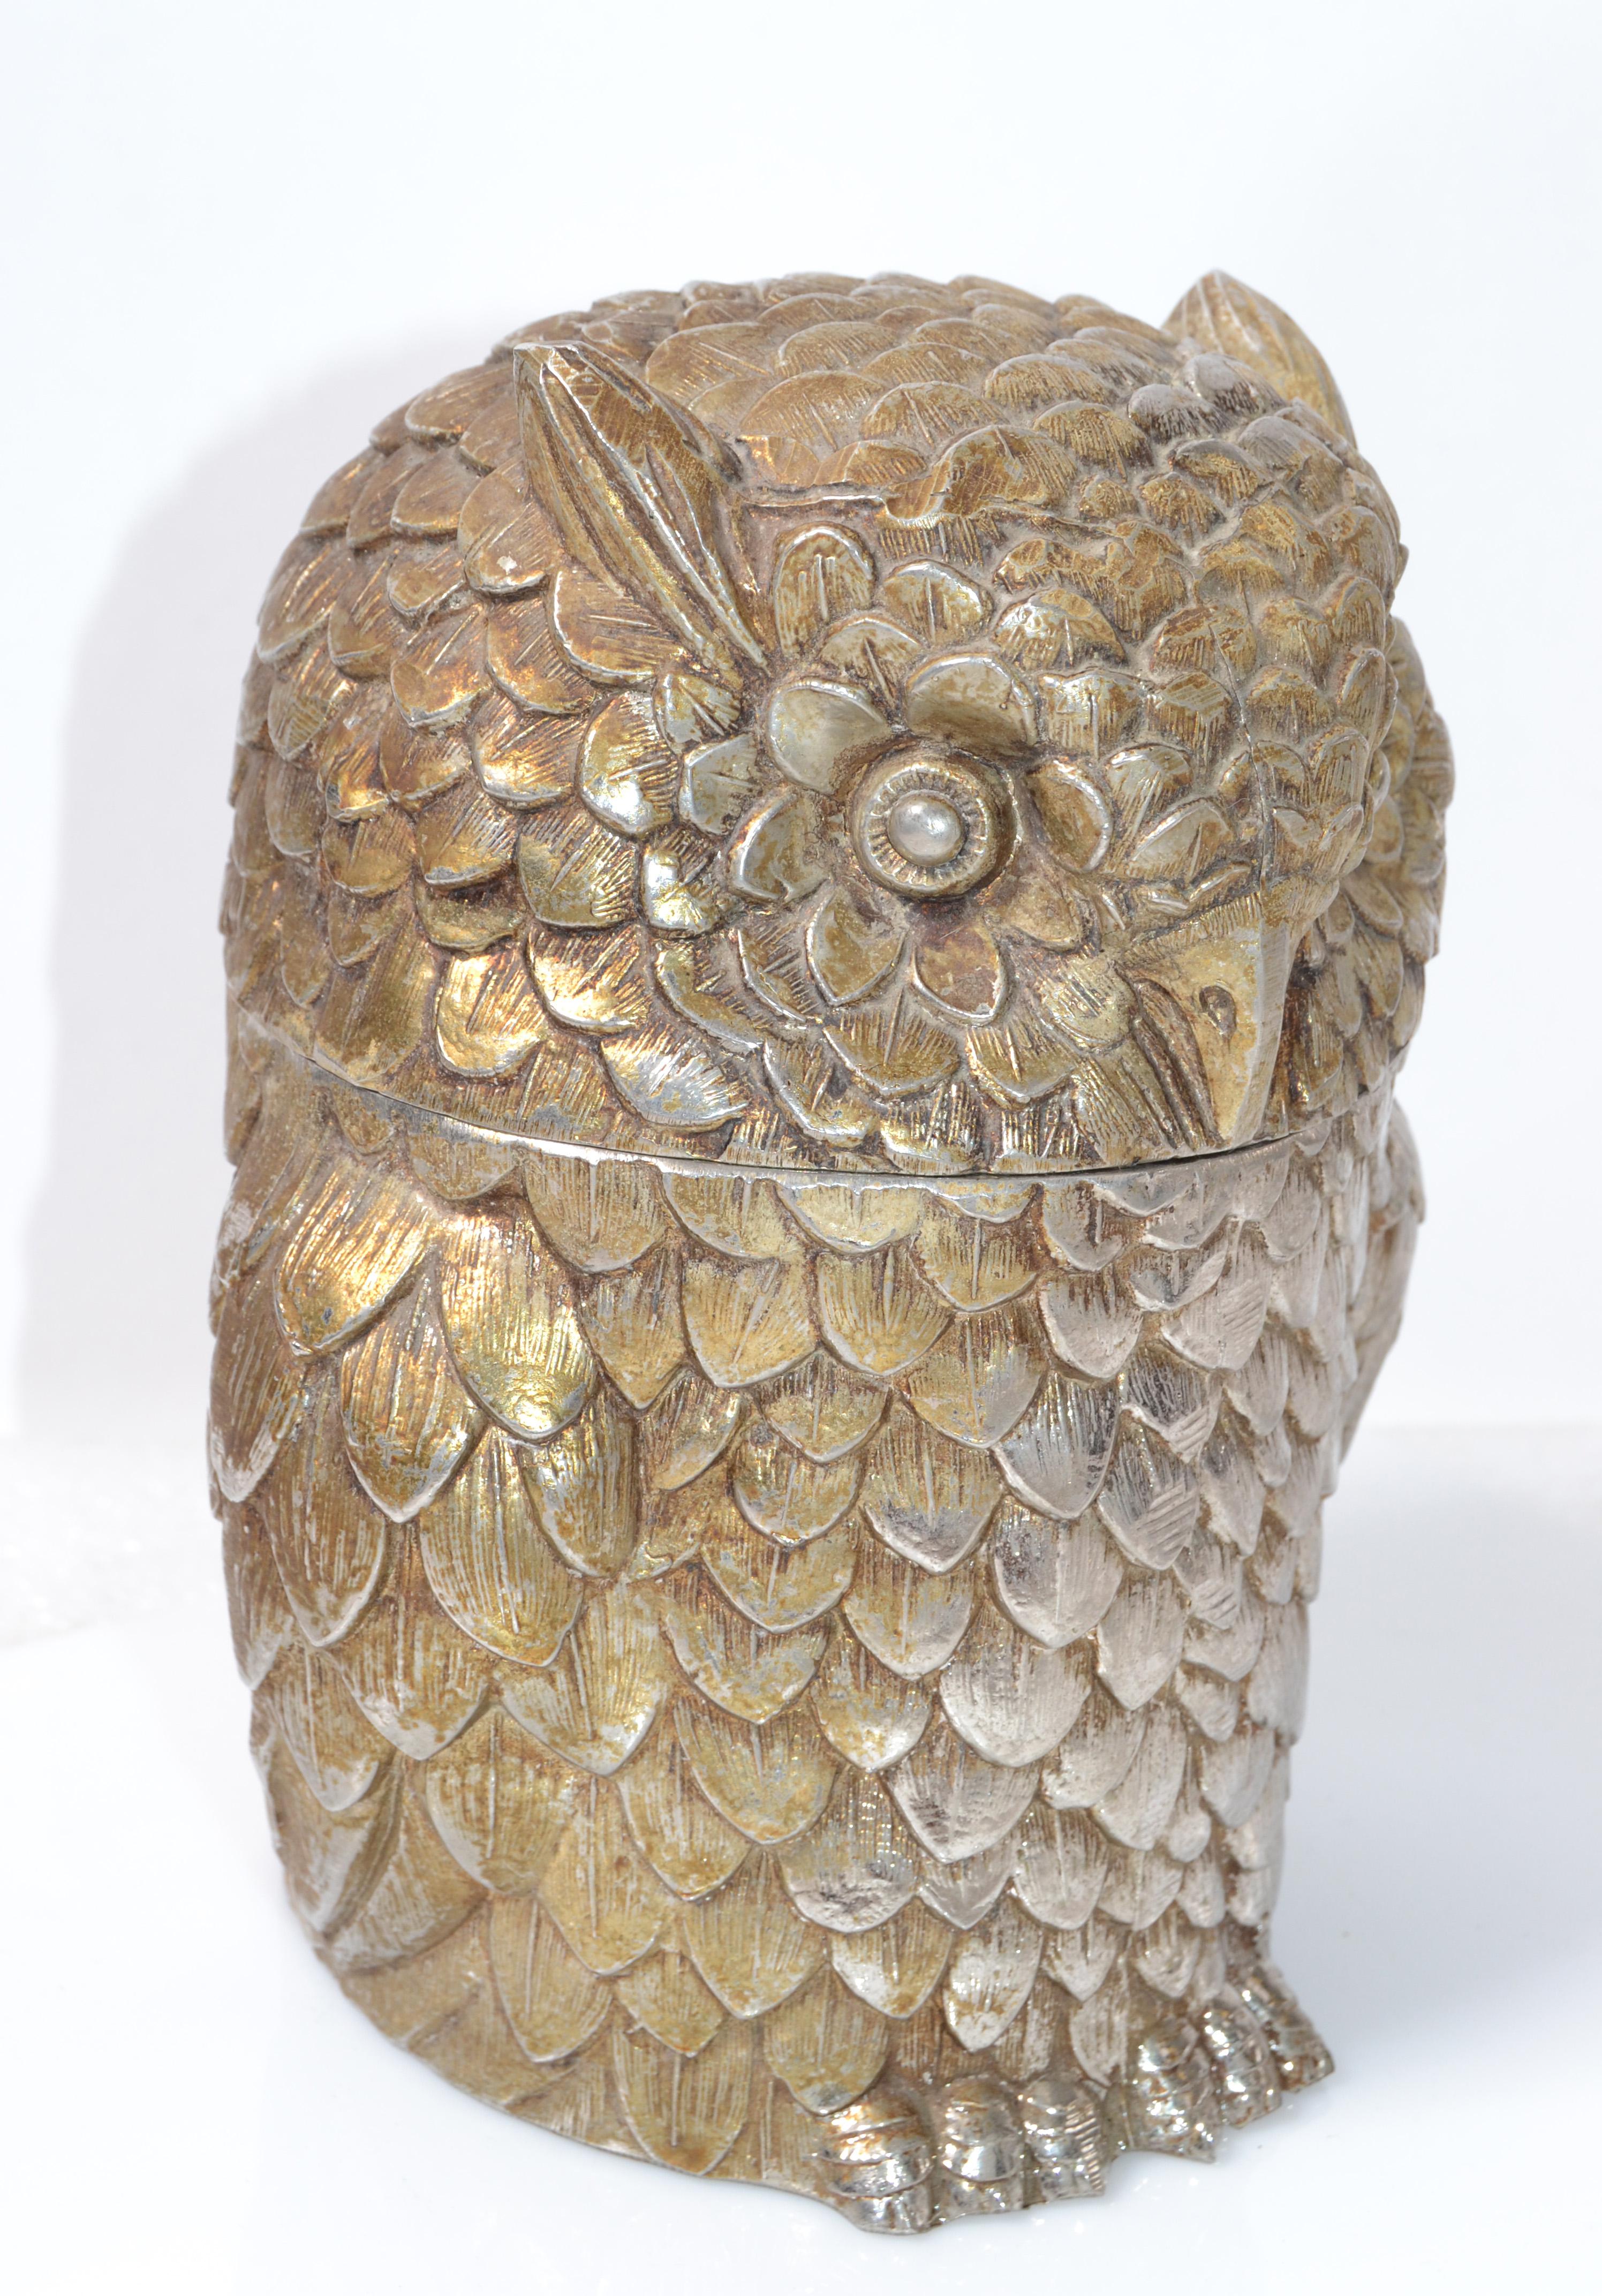 Hand-Crafted Owl Mauro Manetti Gold Plate & Insulated Ice Bucket Mid-Century Modern, Italy For Sale